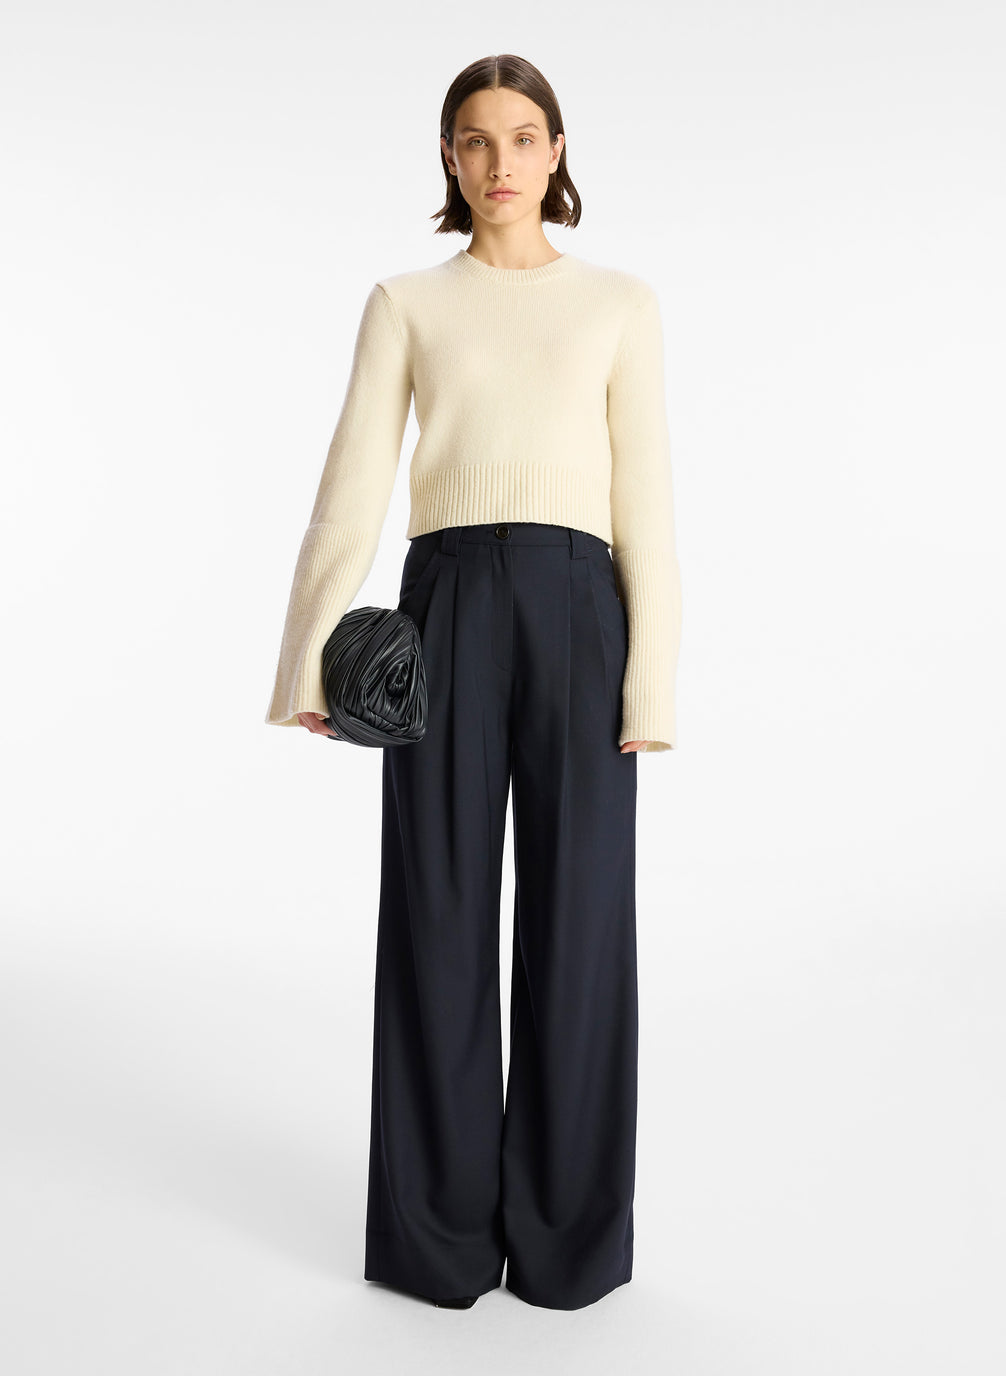 front view of a woman wearing a cream sweater and navy wide leg pants